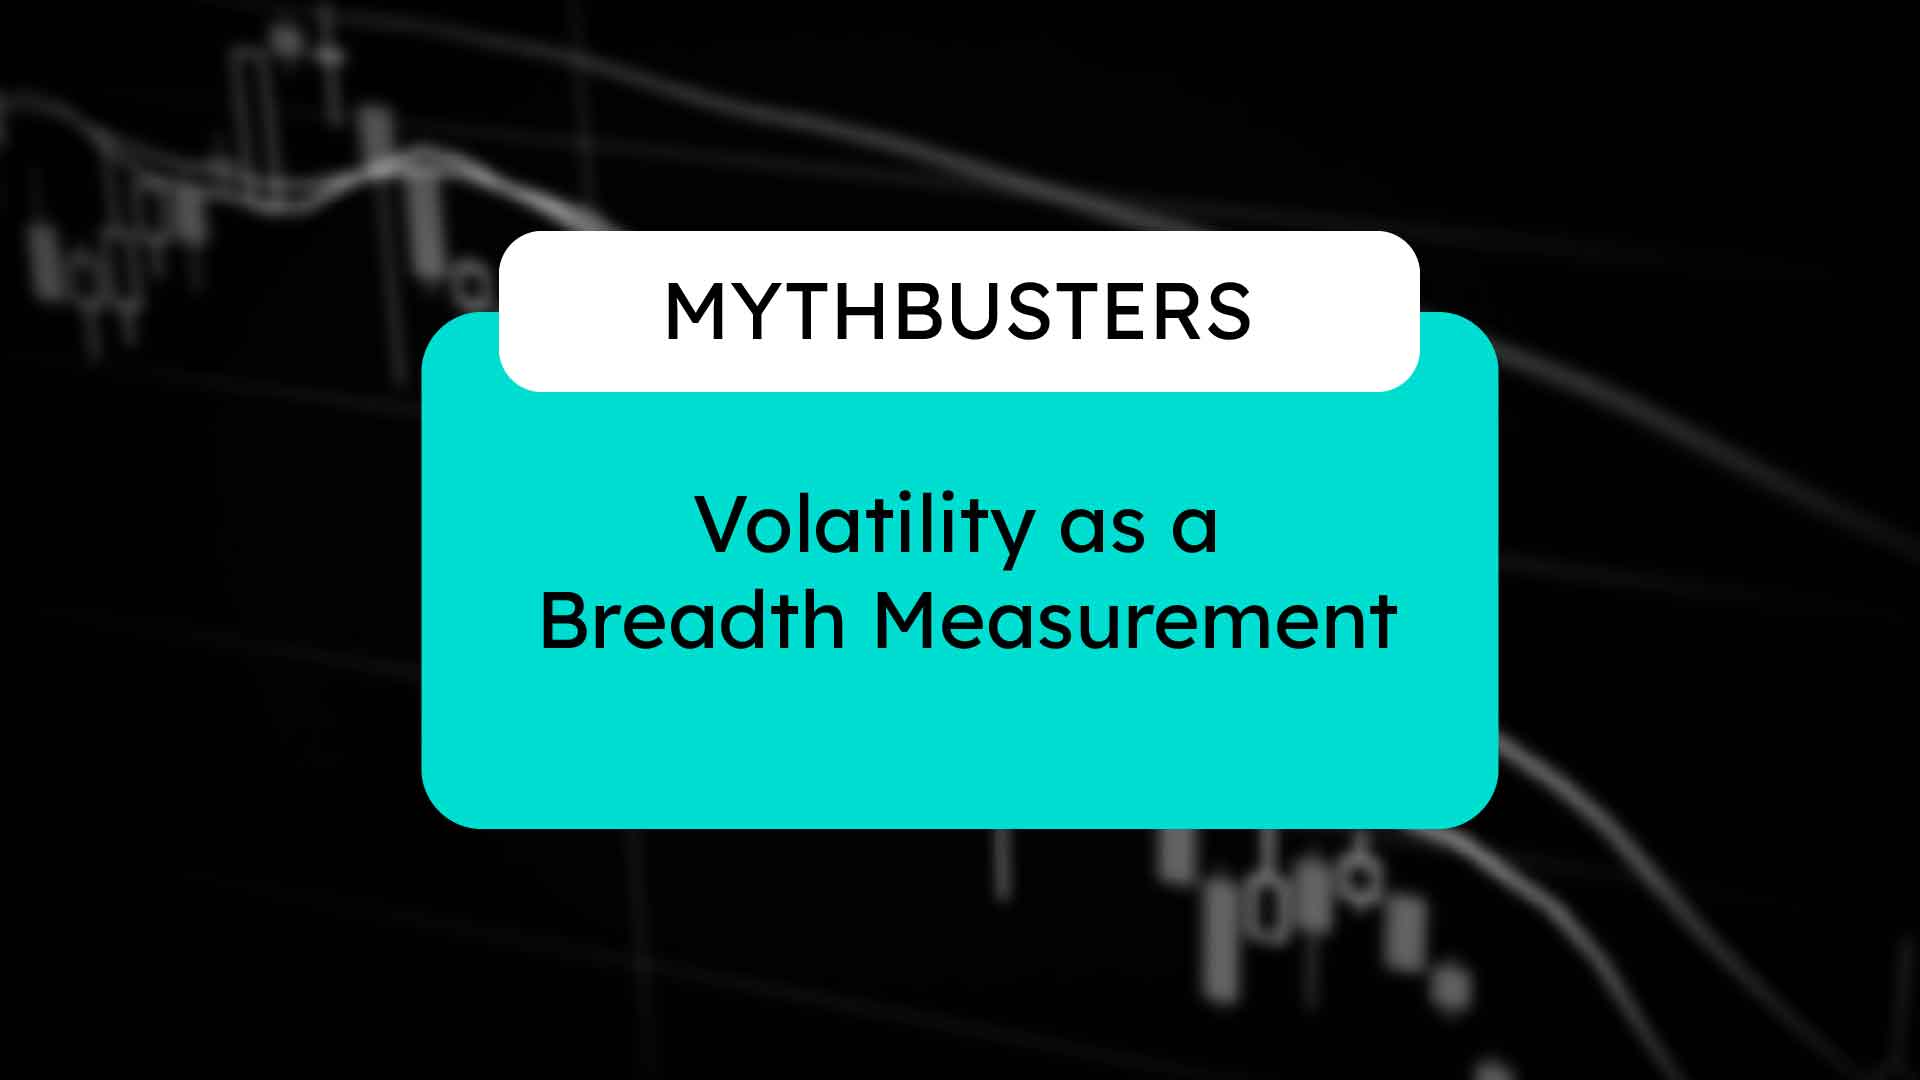 Volatility as a Breadth Measurement